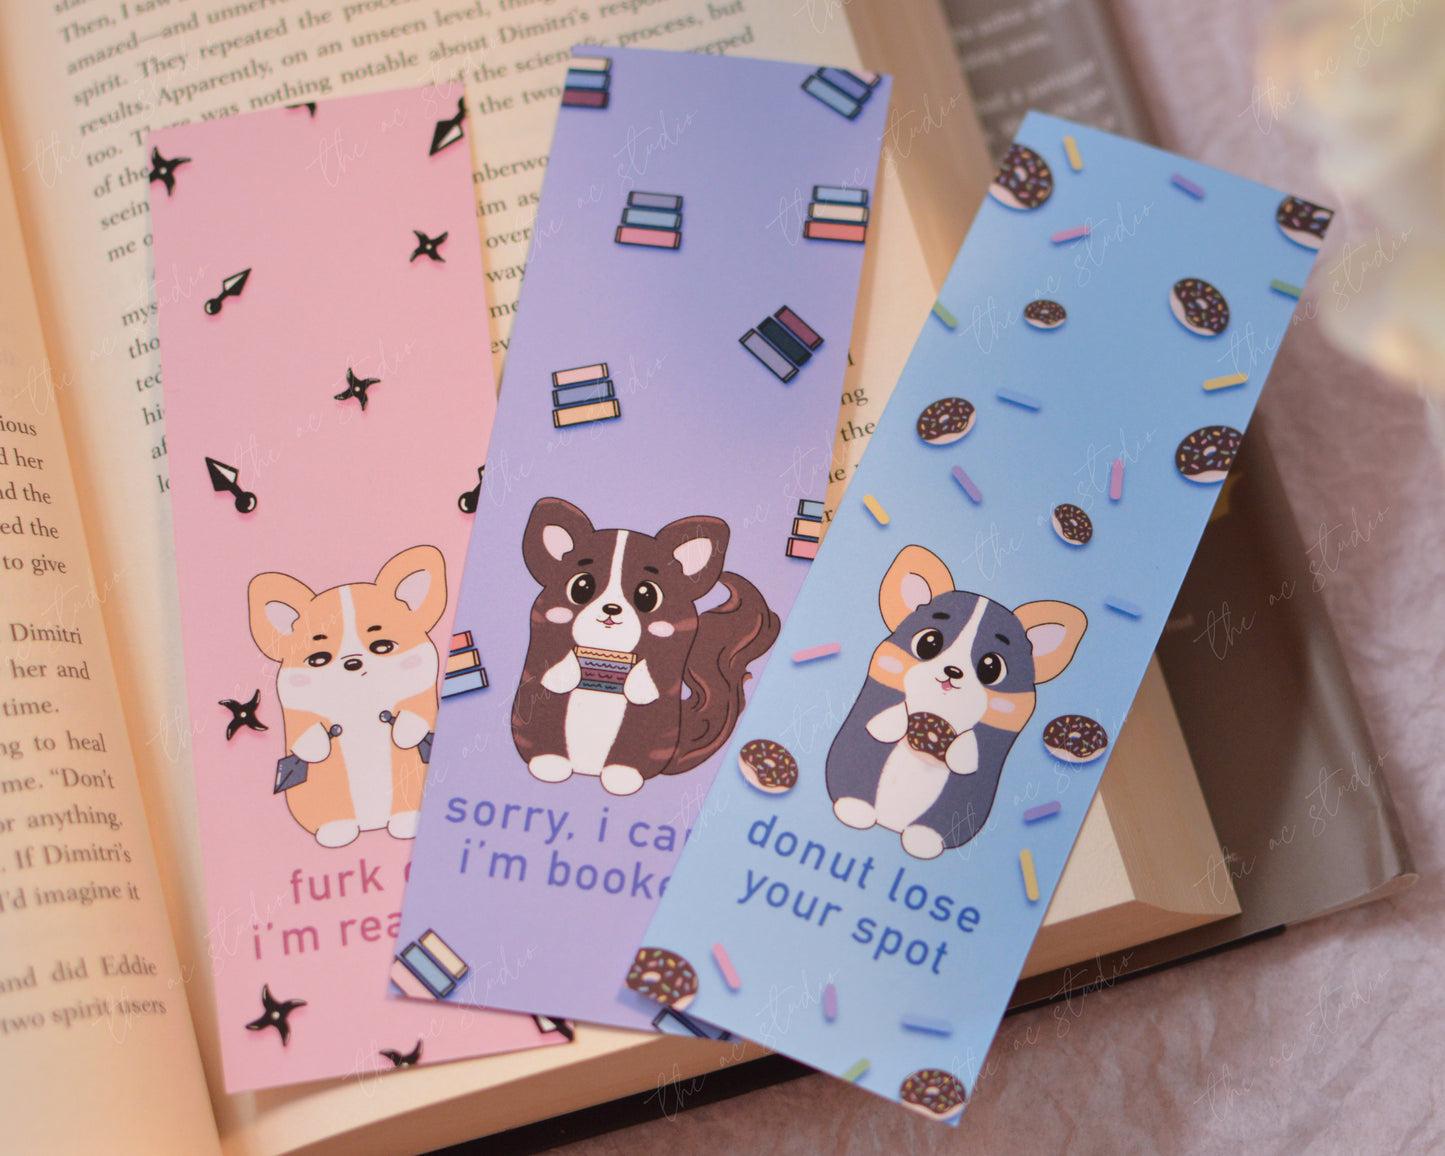 Donut Lose Your Spot Bookmark